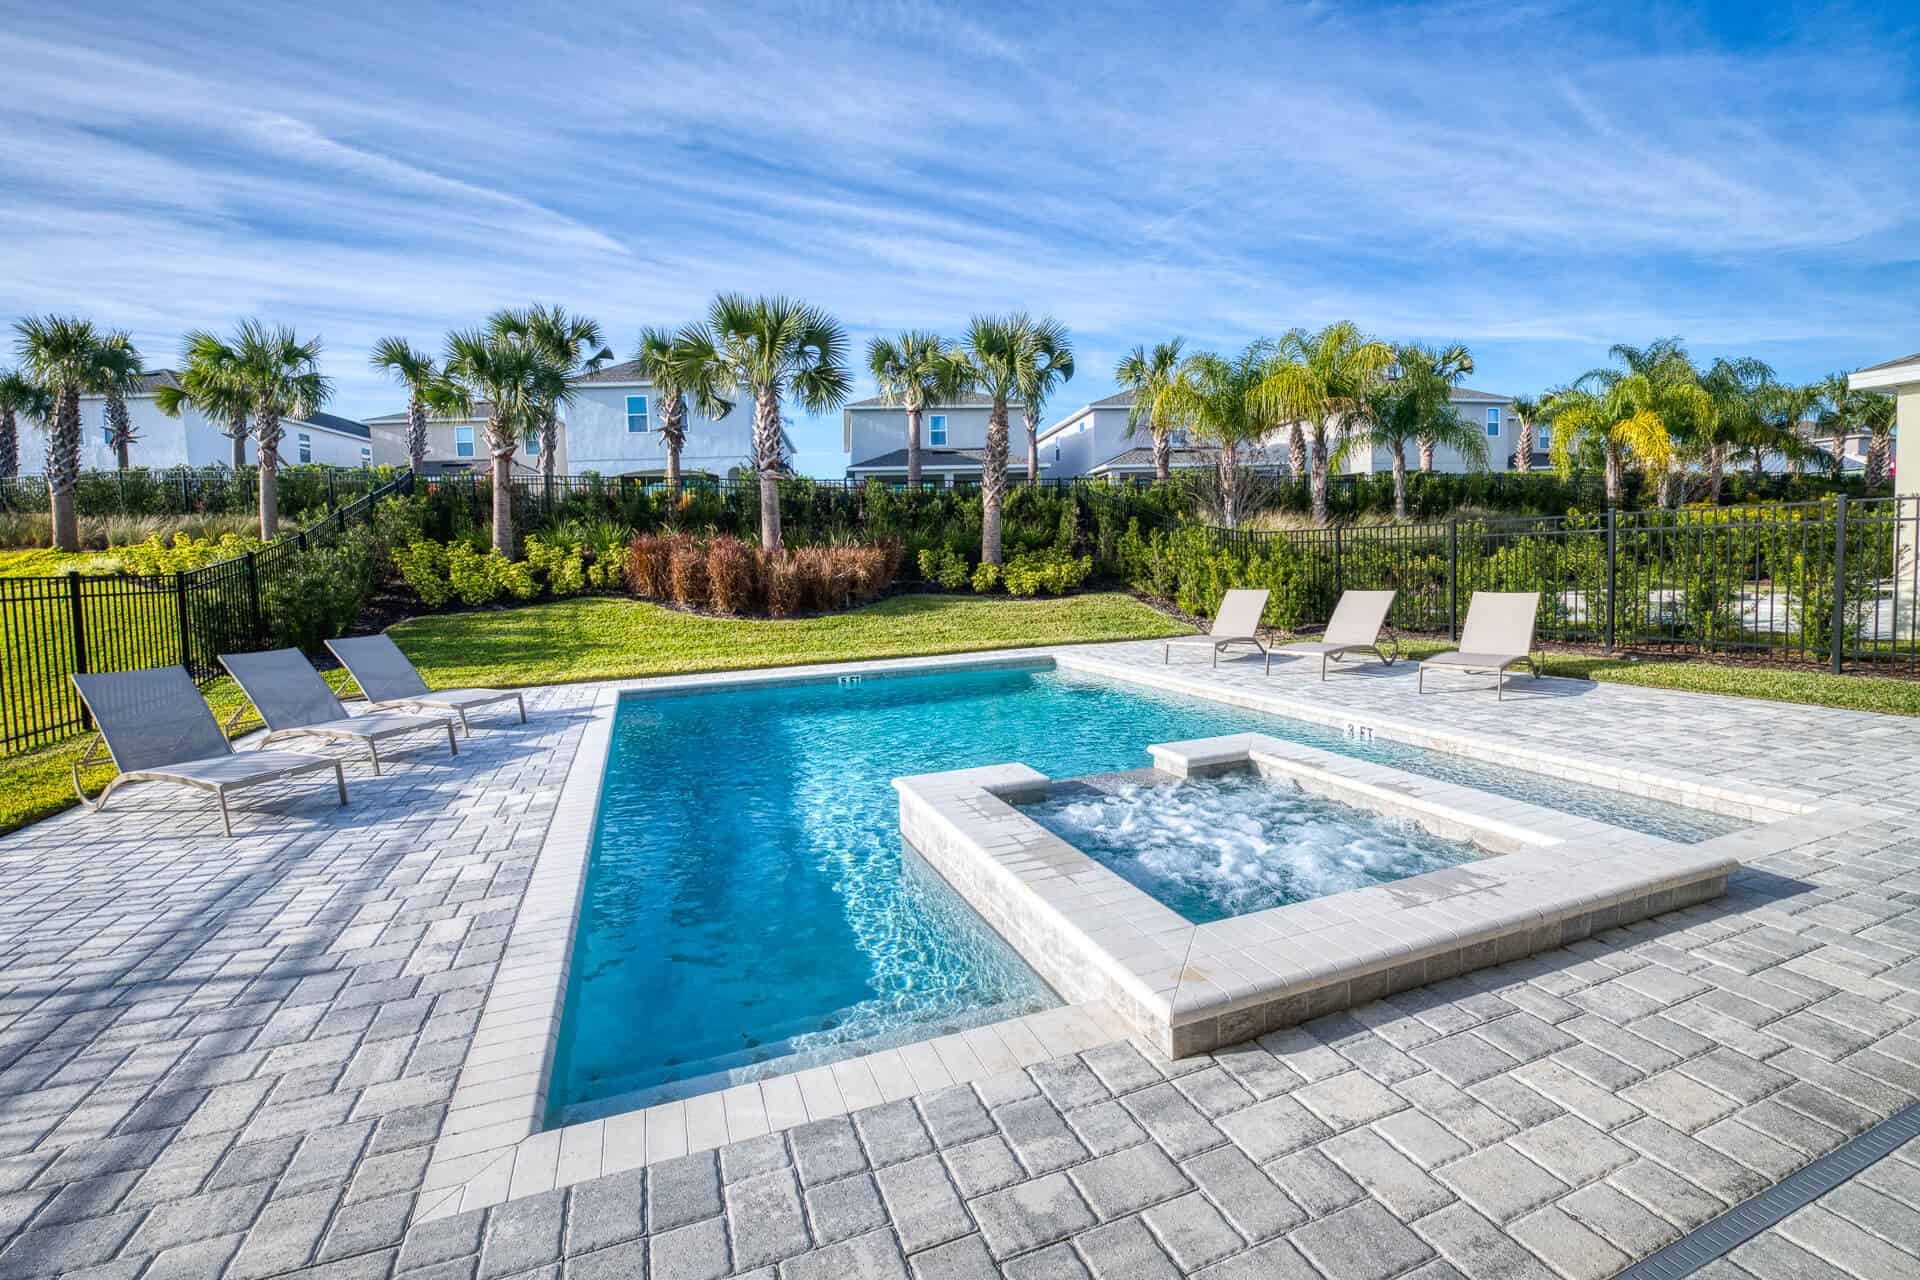 The hot tub of an Encore Resort vacation home rental’s private pool bubbles.